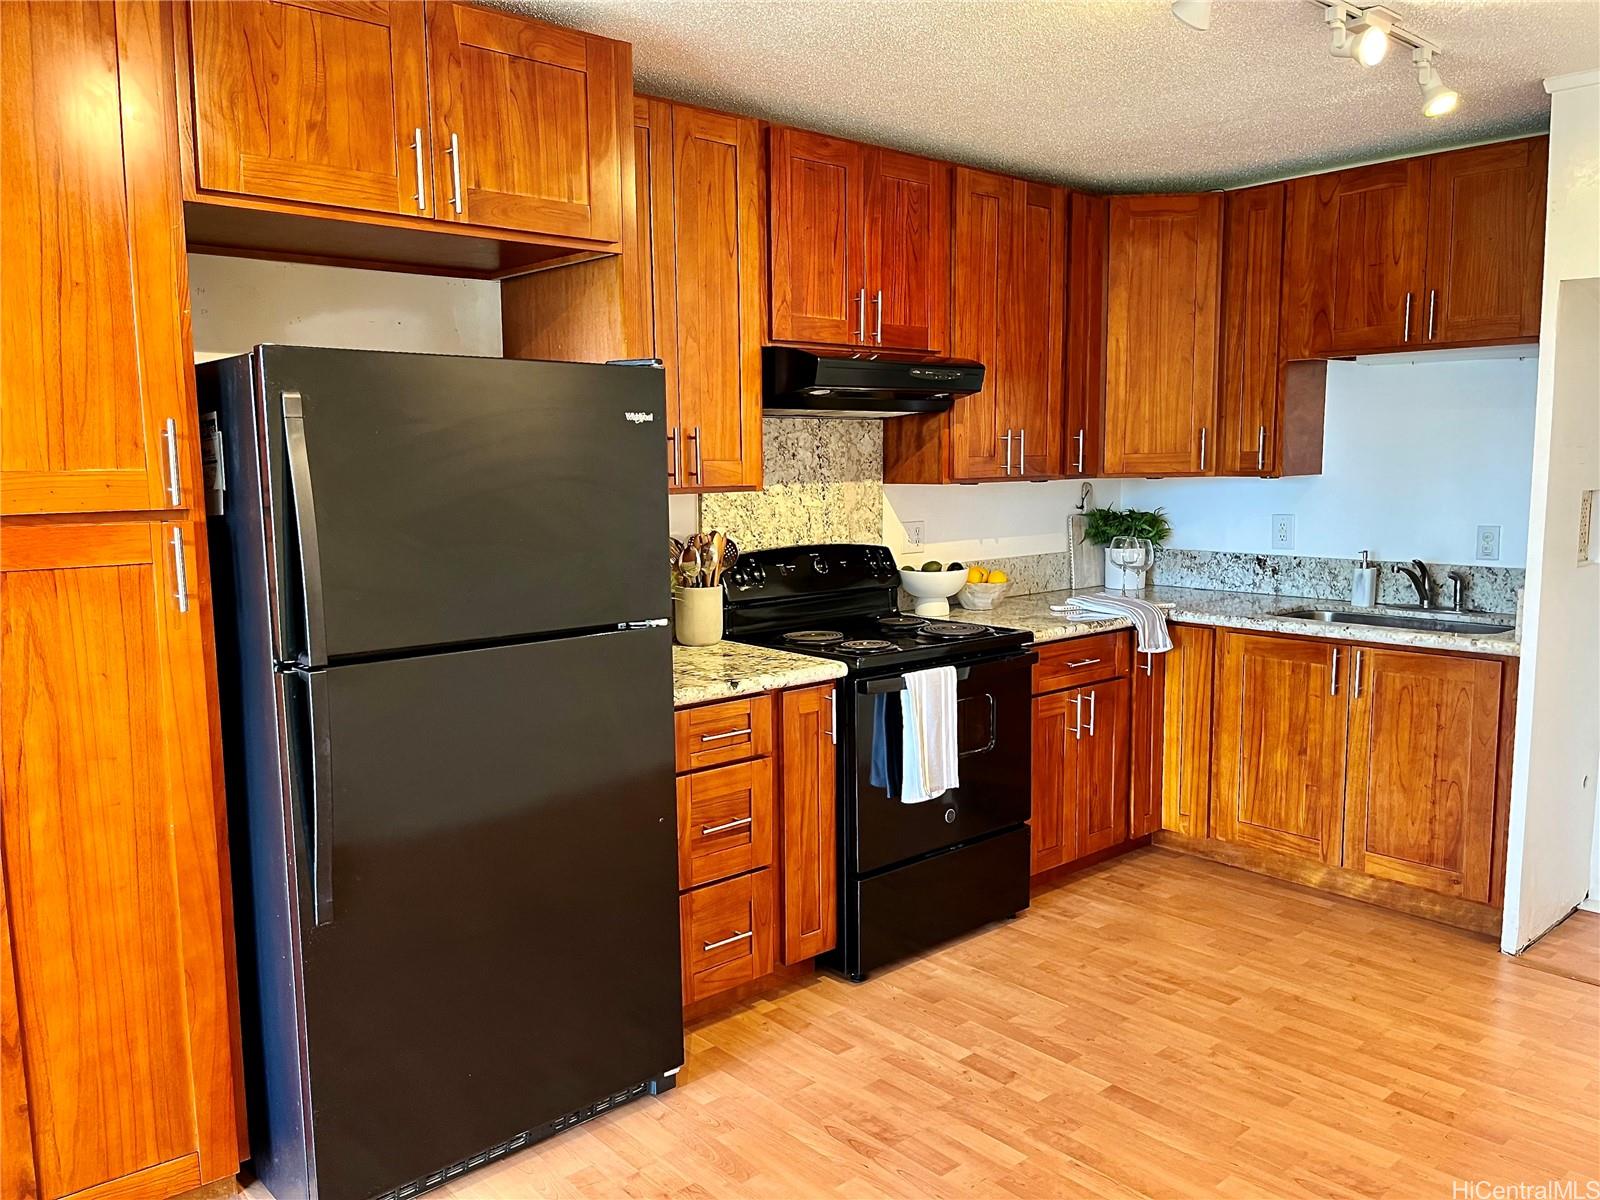 a kitchen with a sink refrigerator and cabinets